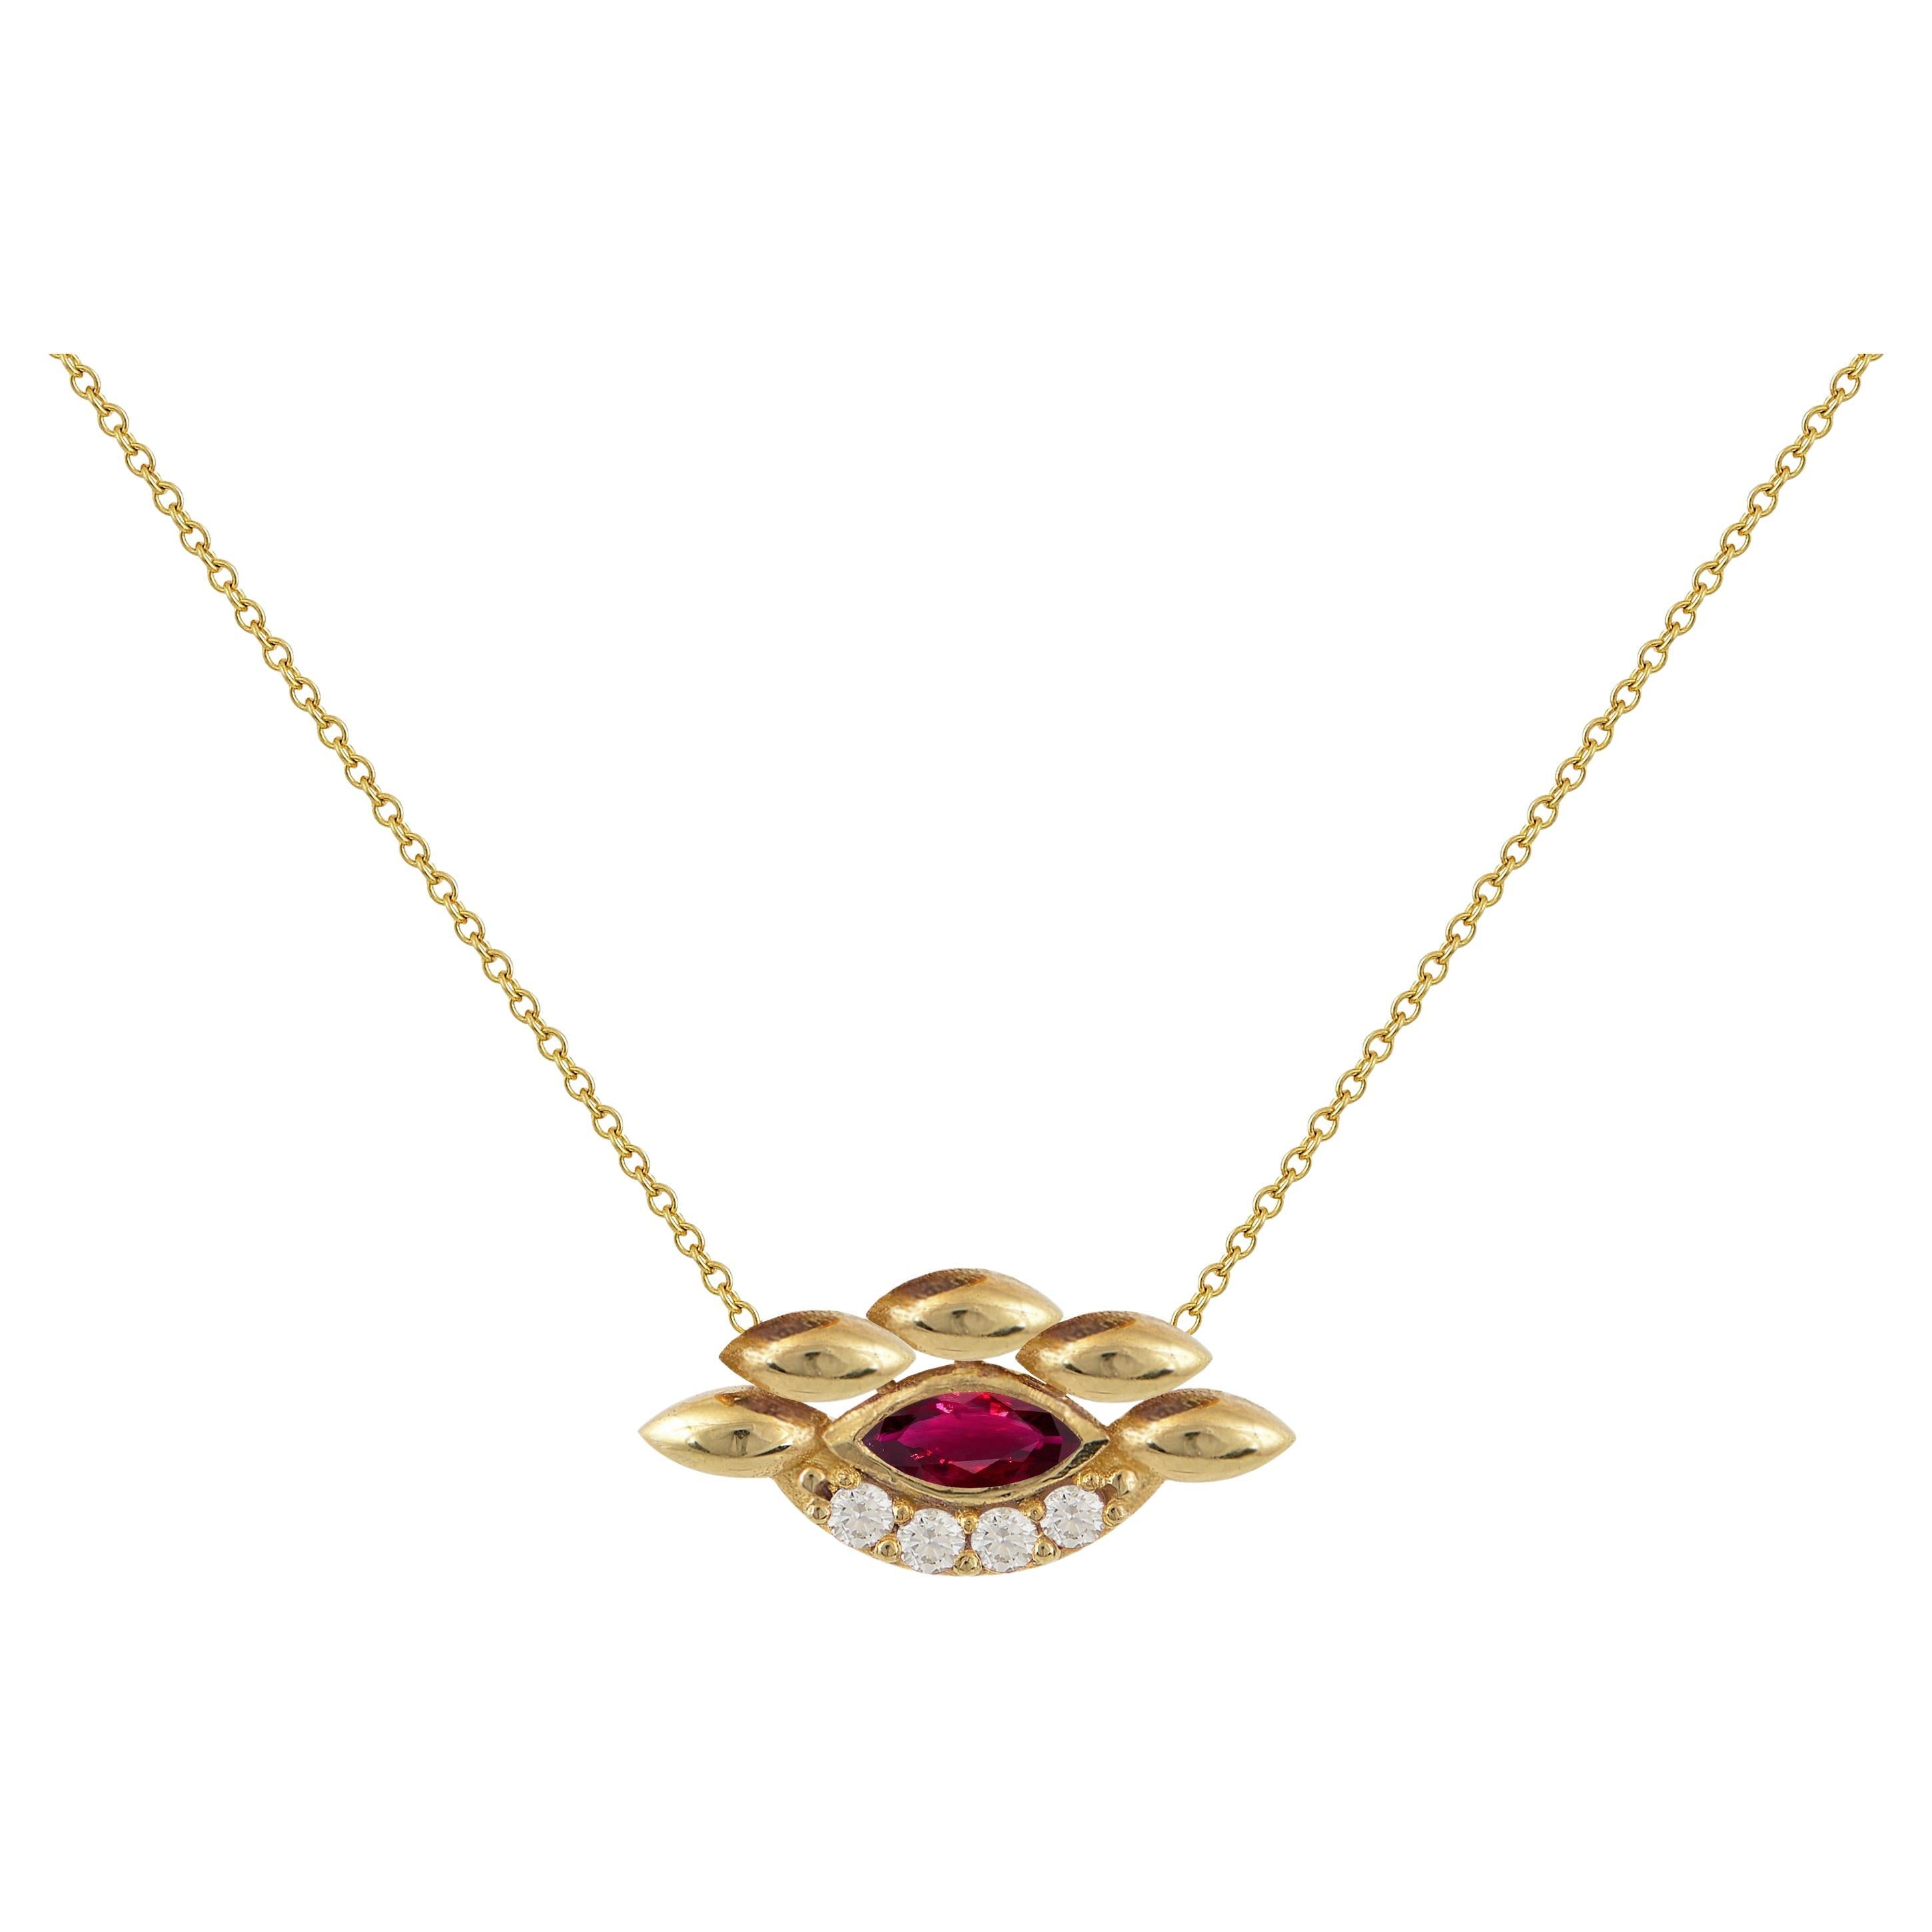 Eye Pendant in 18 Karat Yellow Gold With Diamonds And A Ruby